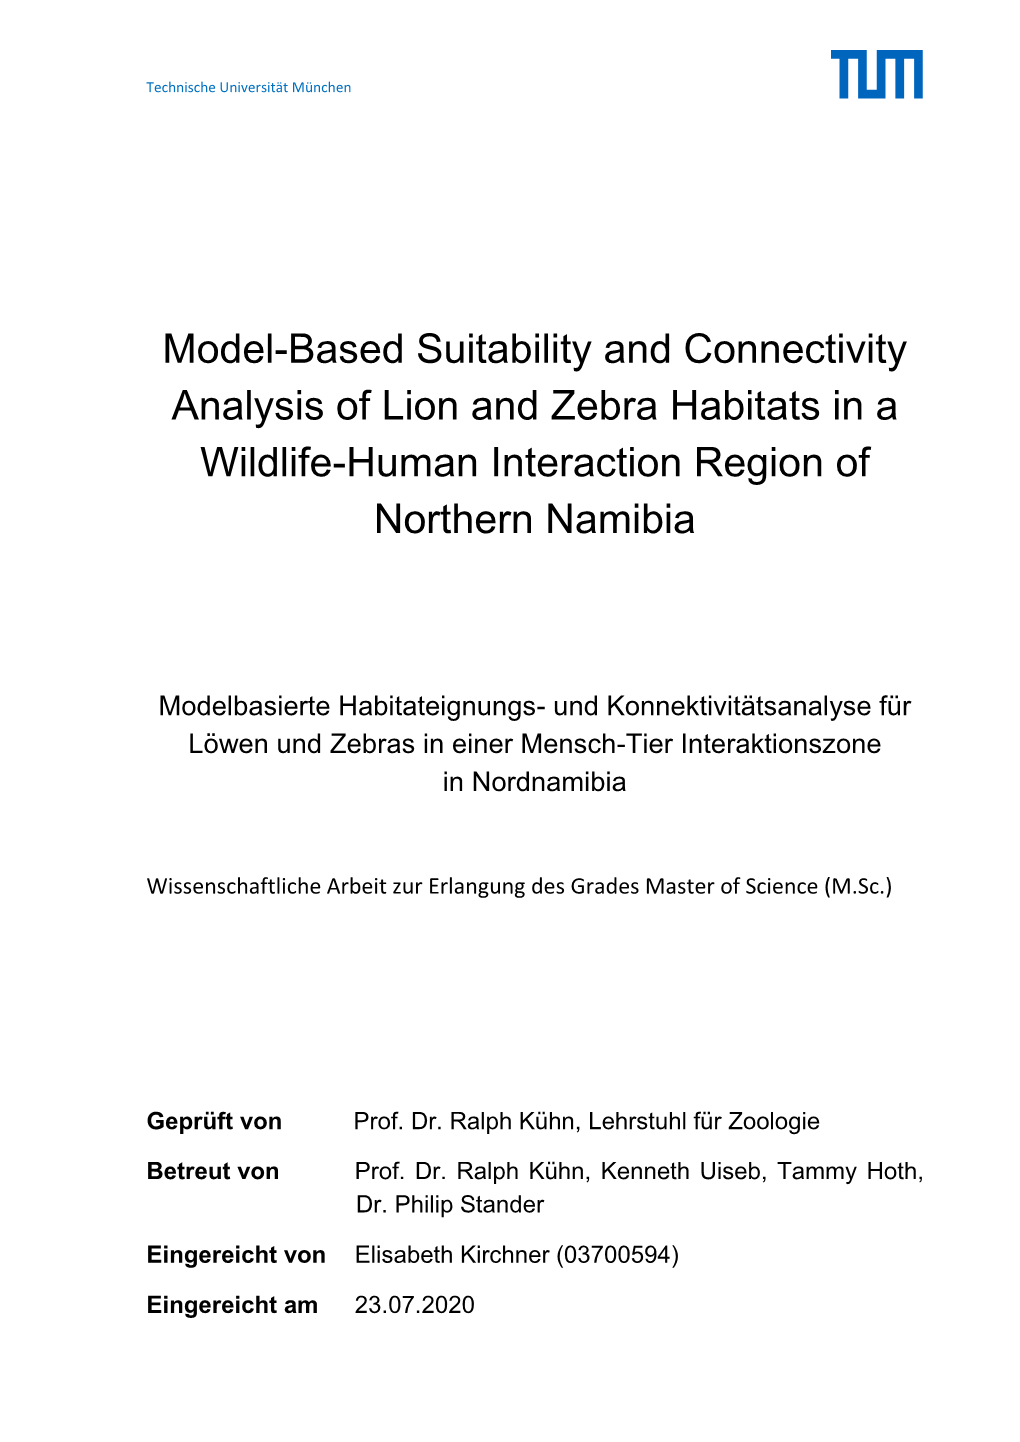 Model-Based Suitability and Connectivity Analysis of Lion and Zebra Habitats in a Wildlife-Human Interaction Region of Northern Namibia